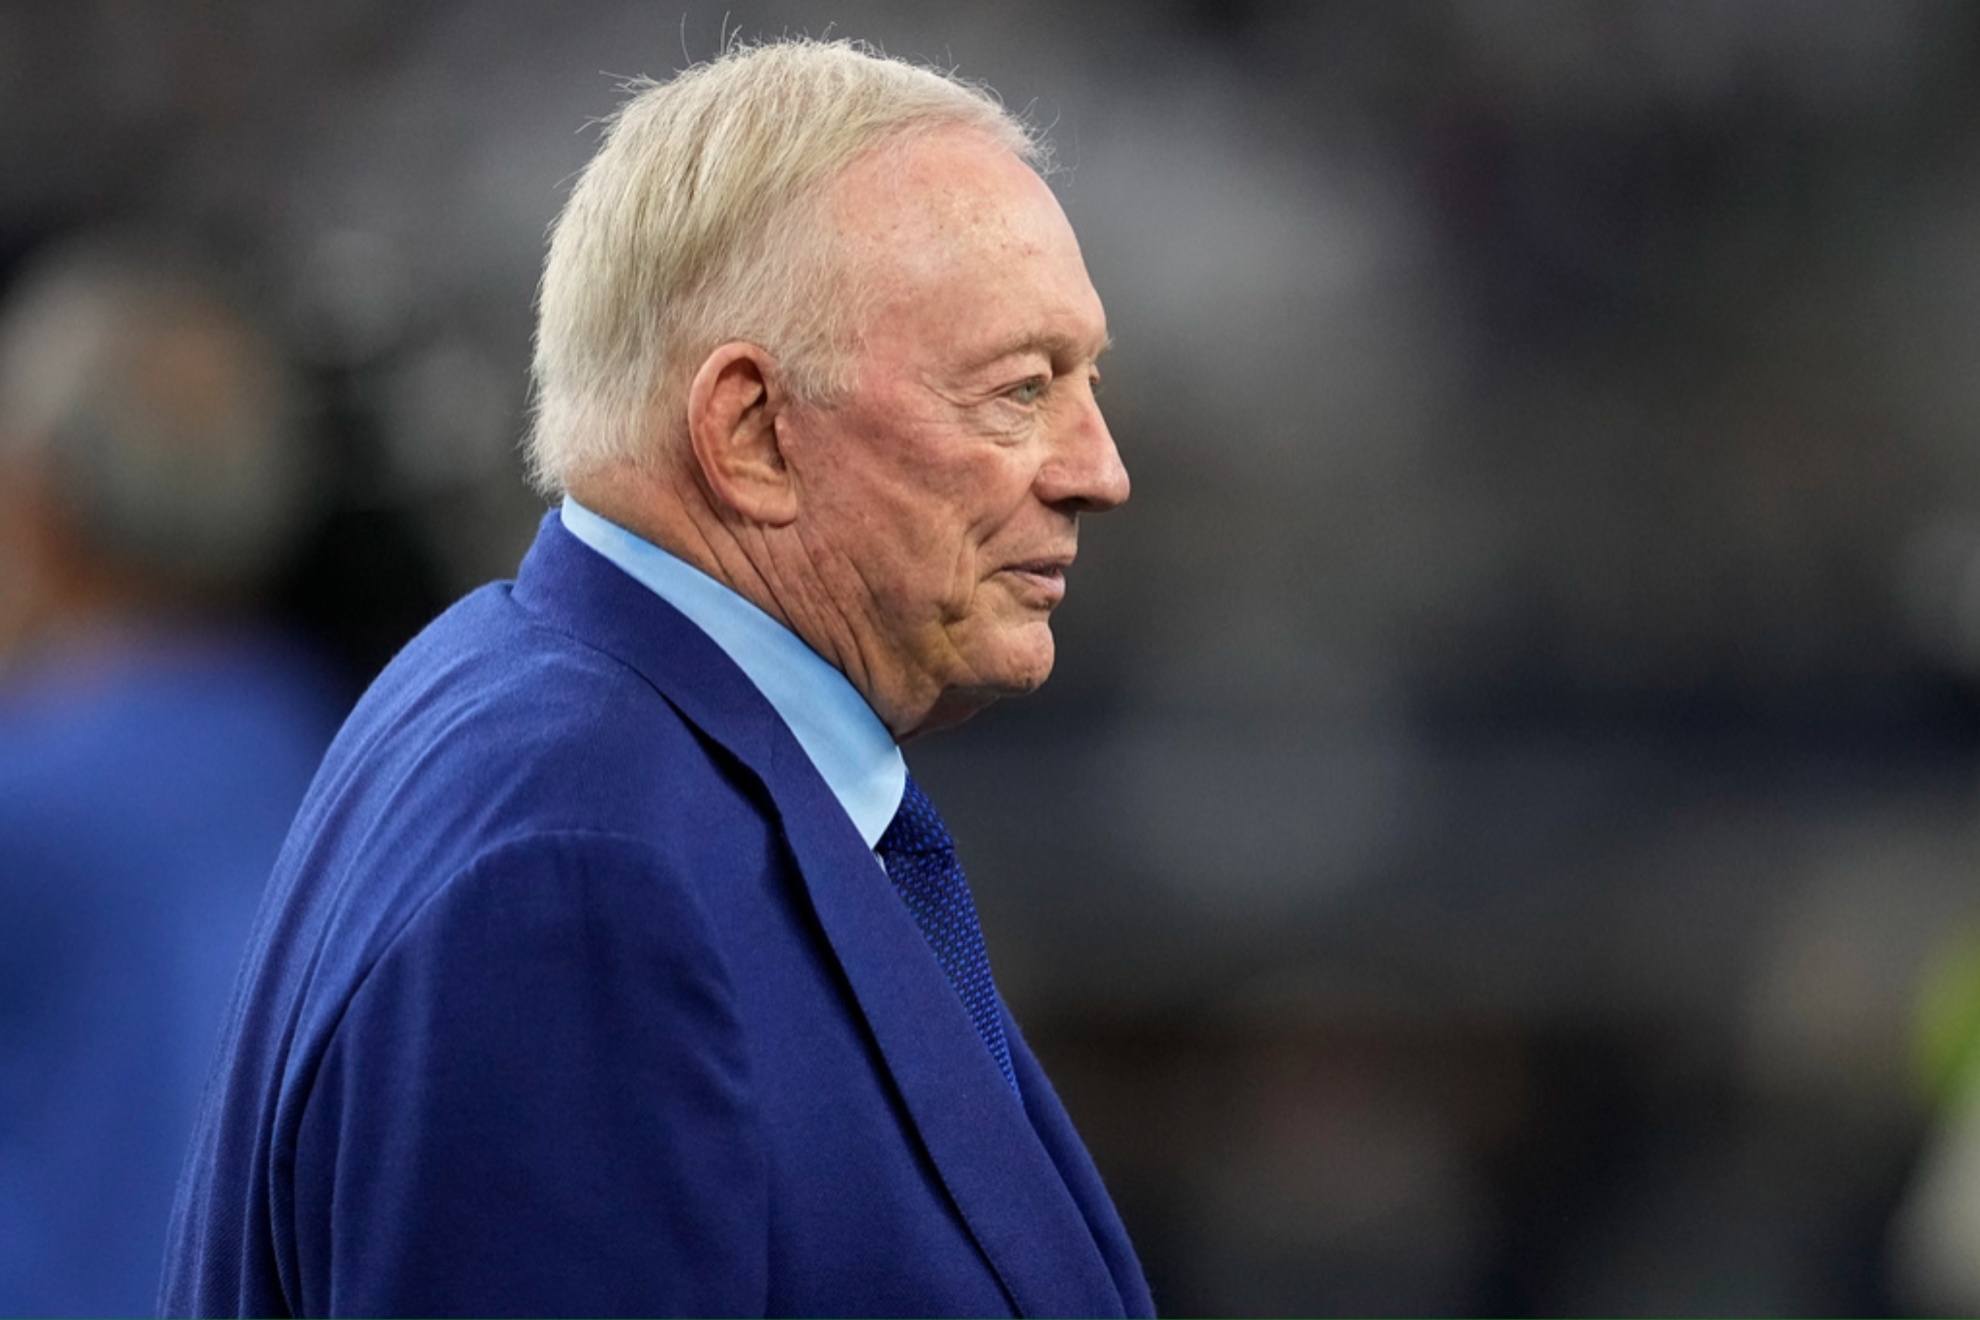 Alexandra Davis has refiled a lawsuit claiming she is the daughter of Jerry Jones